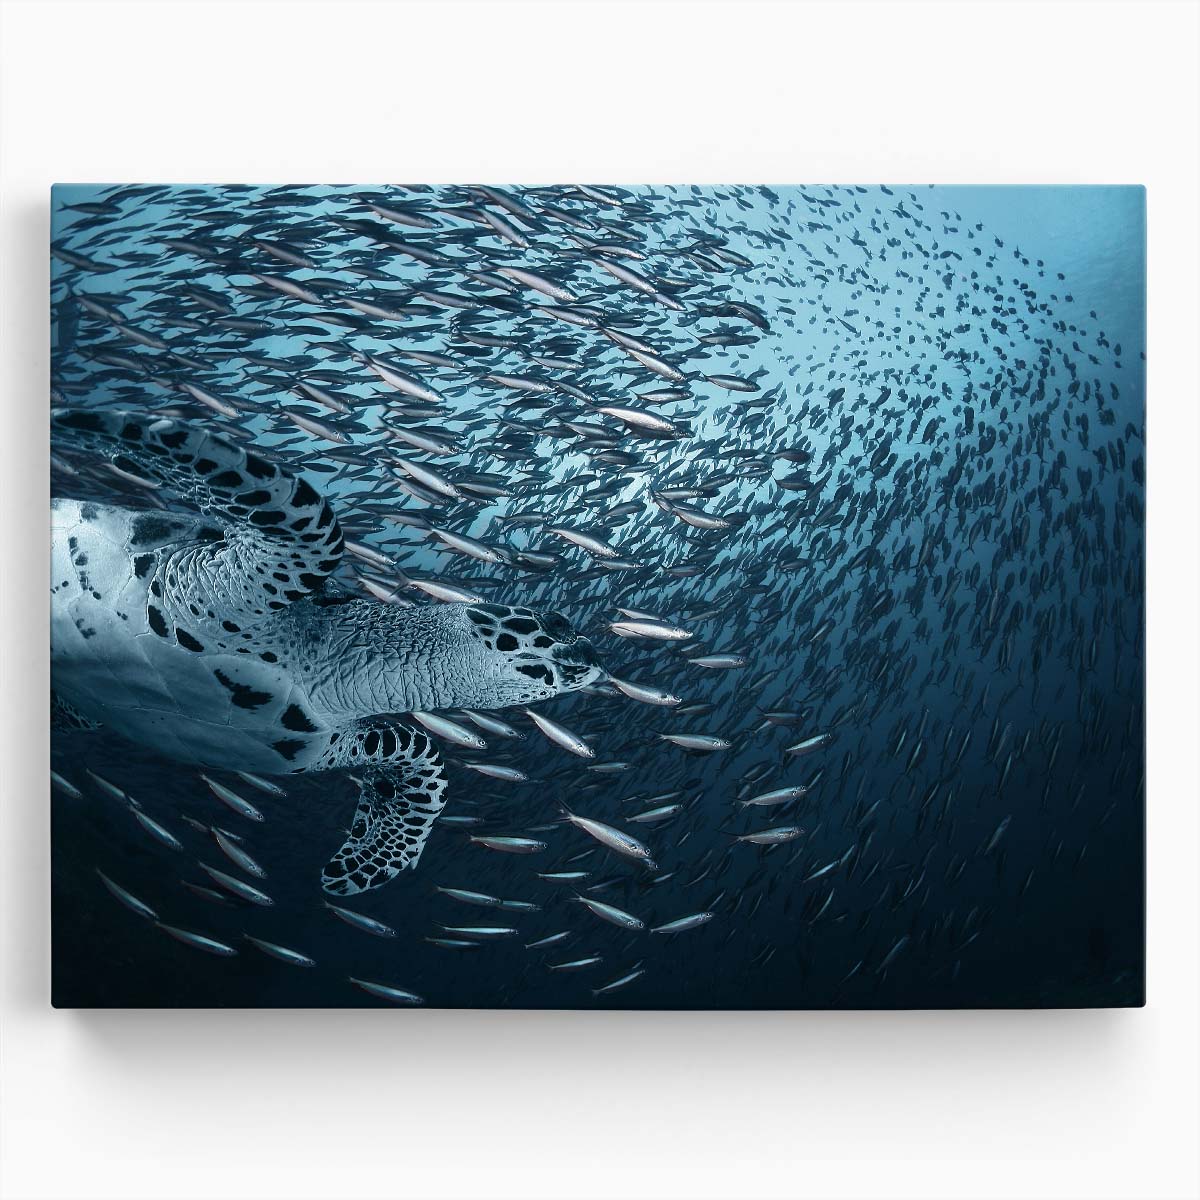 Similan Islands Sea Turtle & Sardine Shoal Wall Art by Luxuriance Designs. Made in USA.